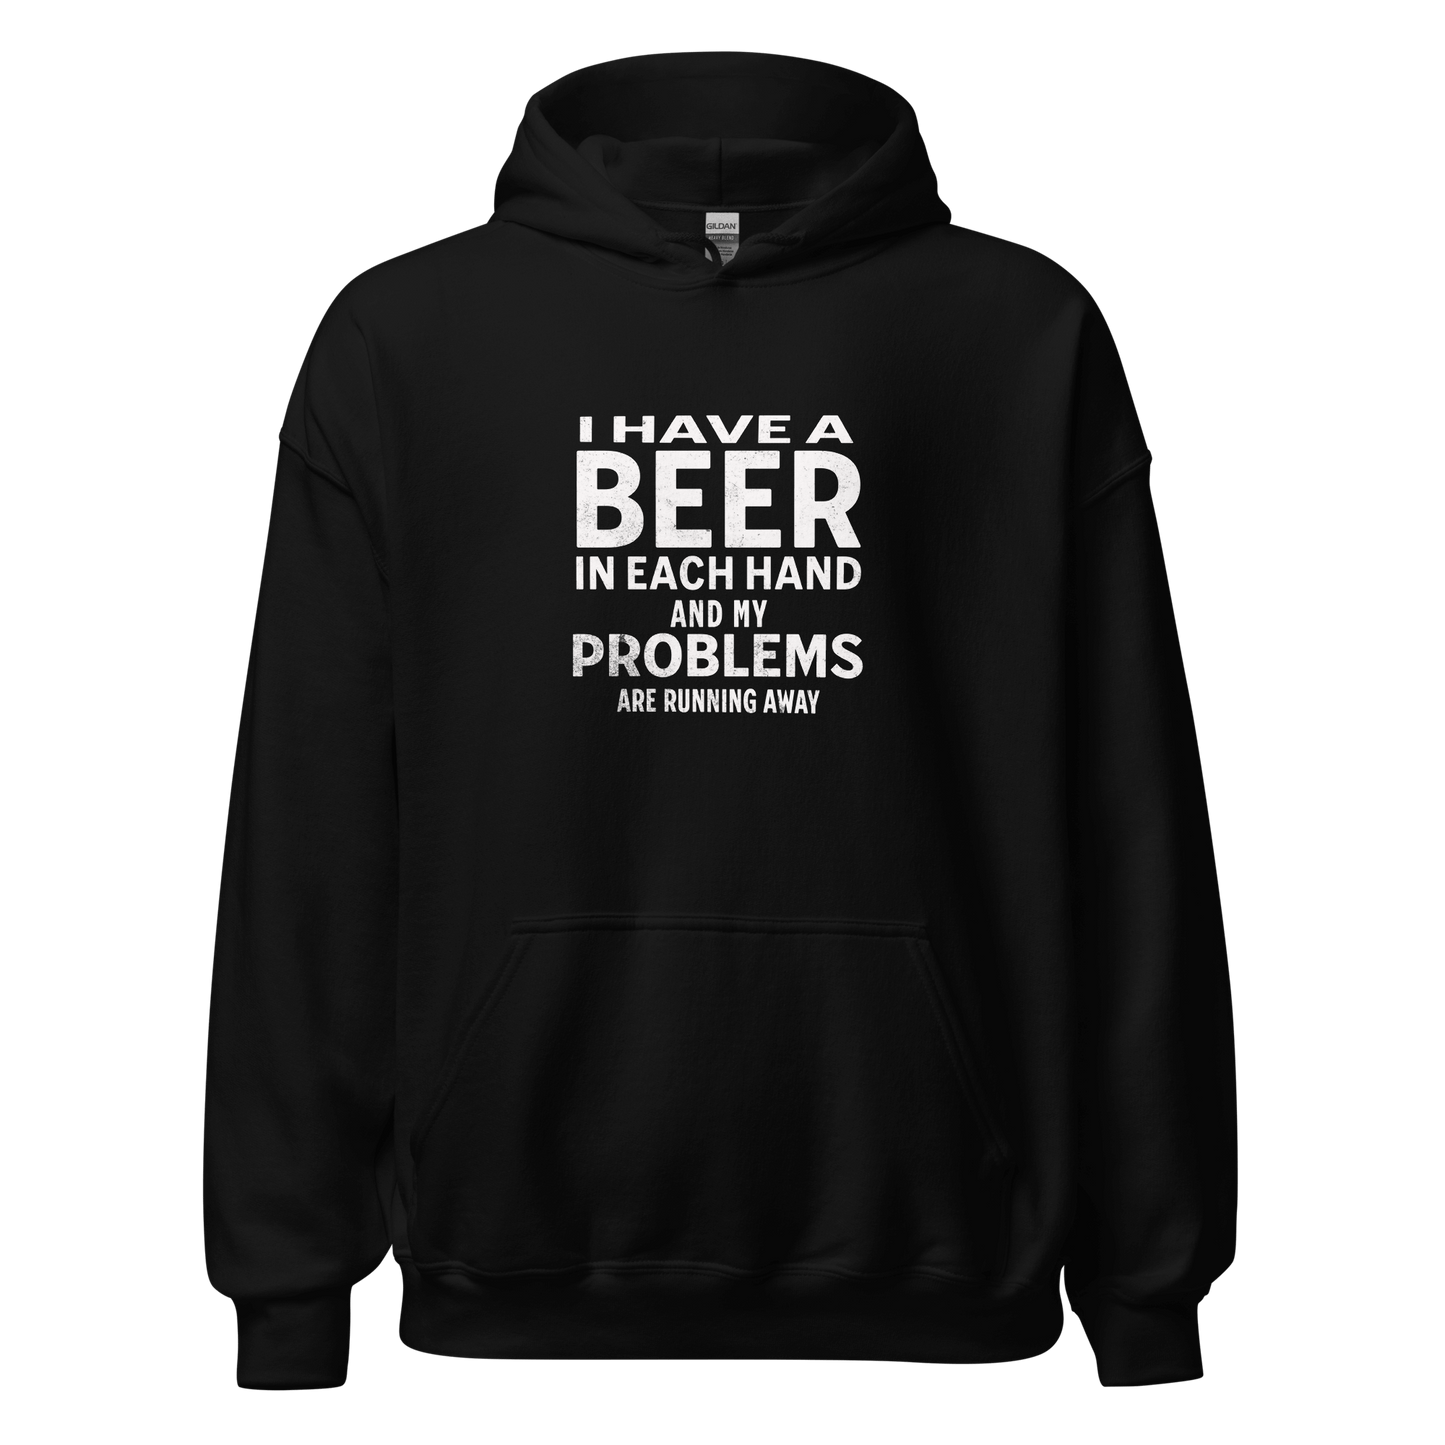 I Have a Beer in Each Hand Hoodie